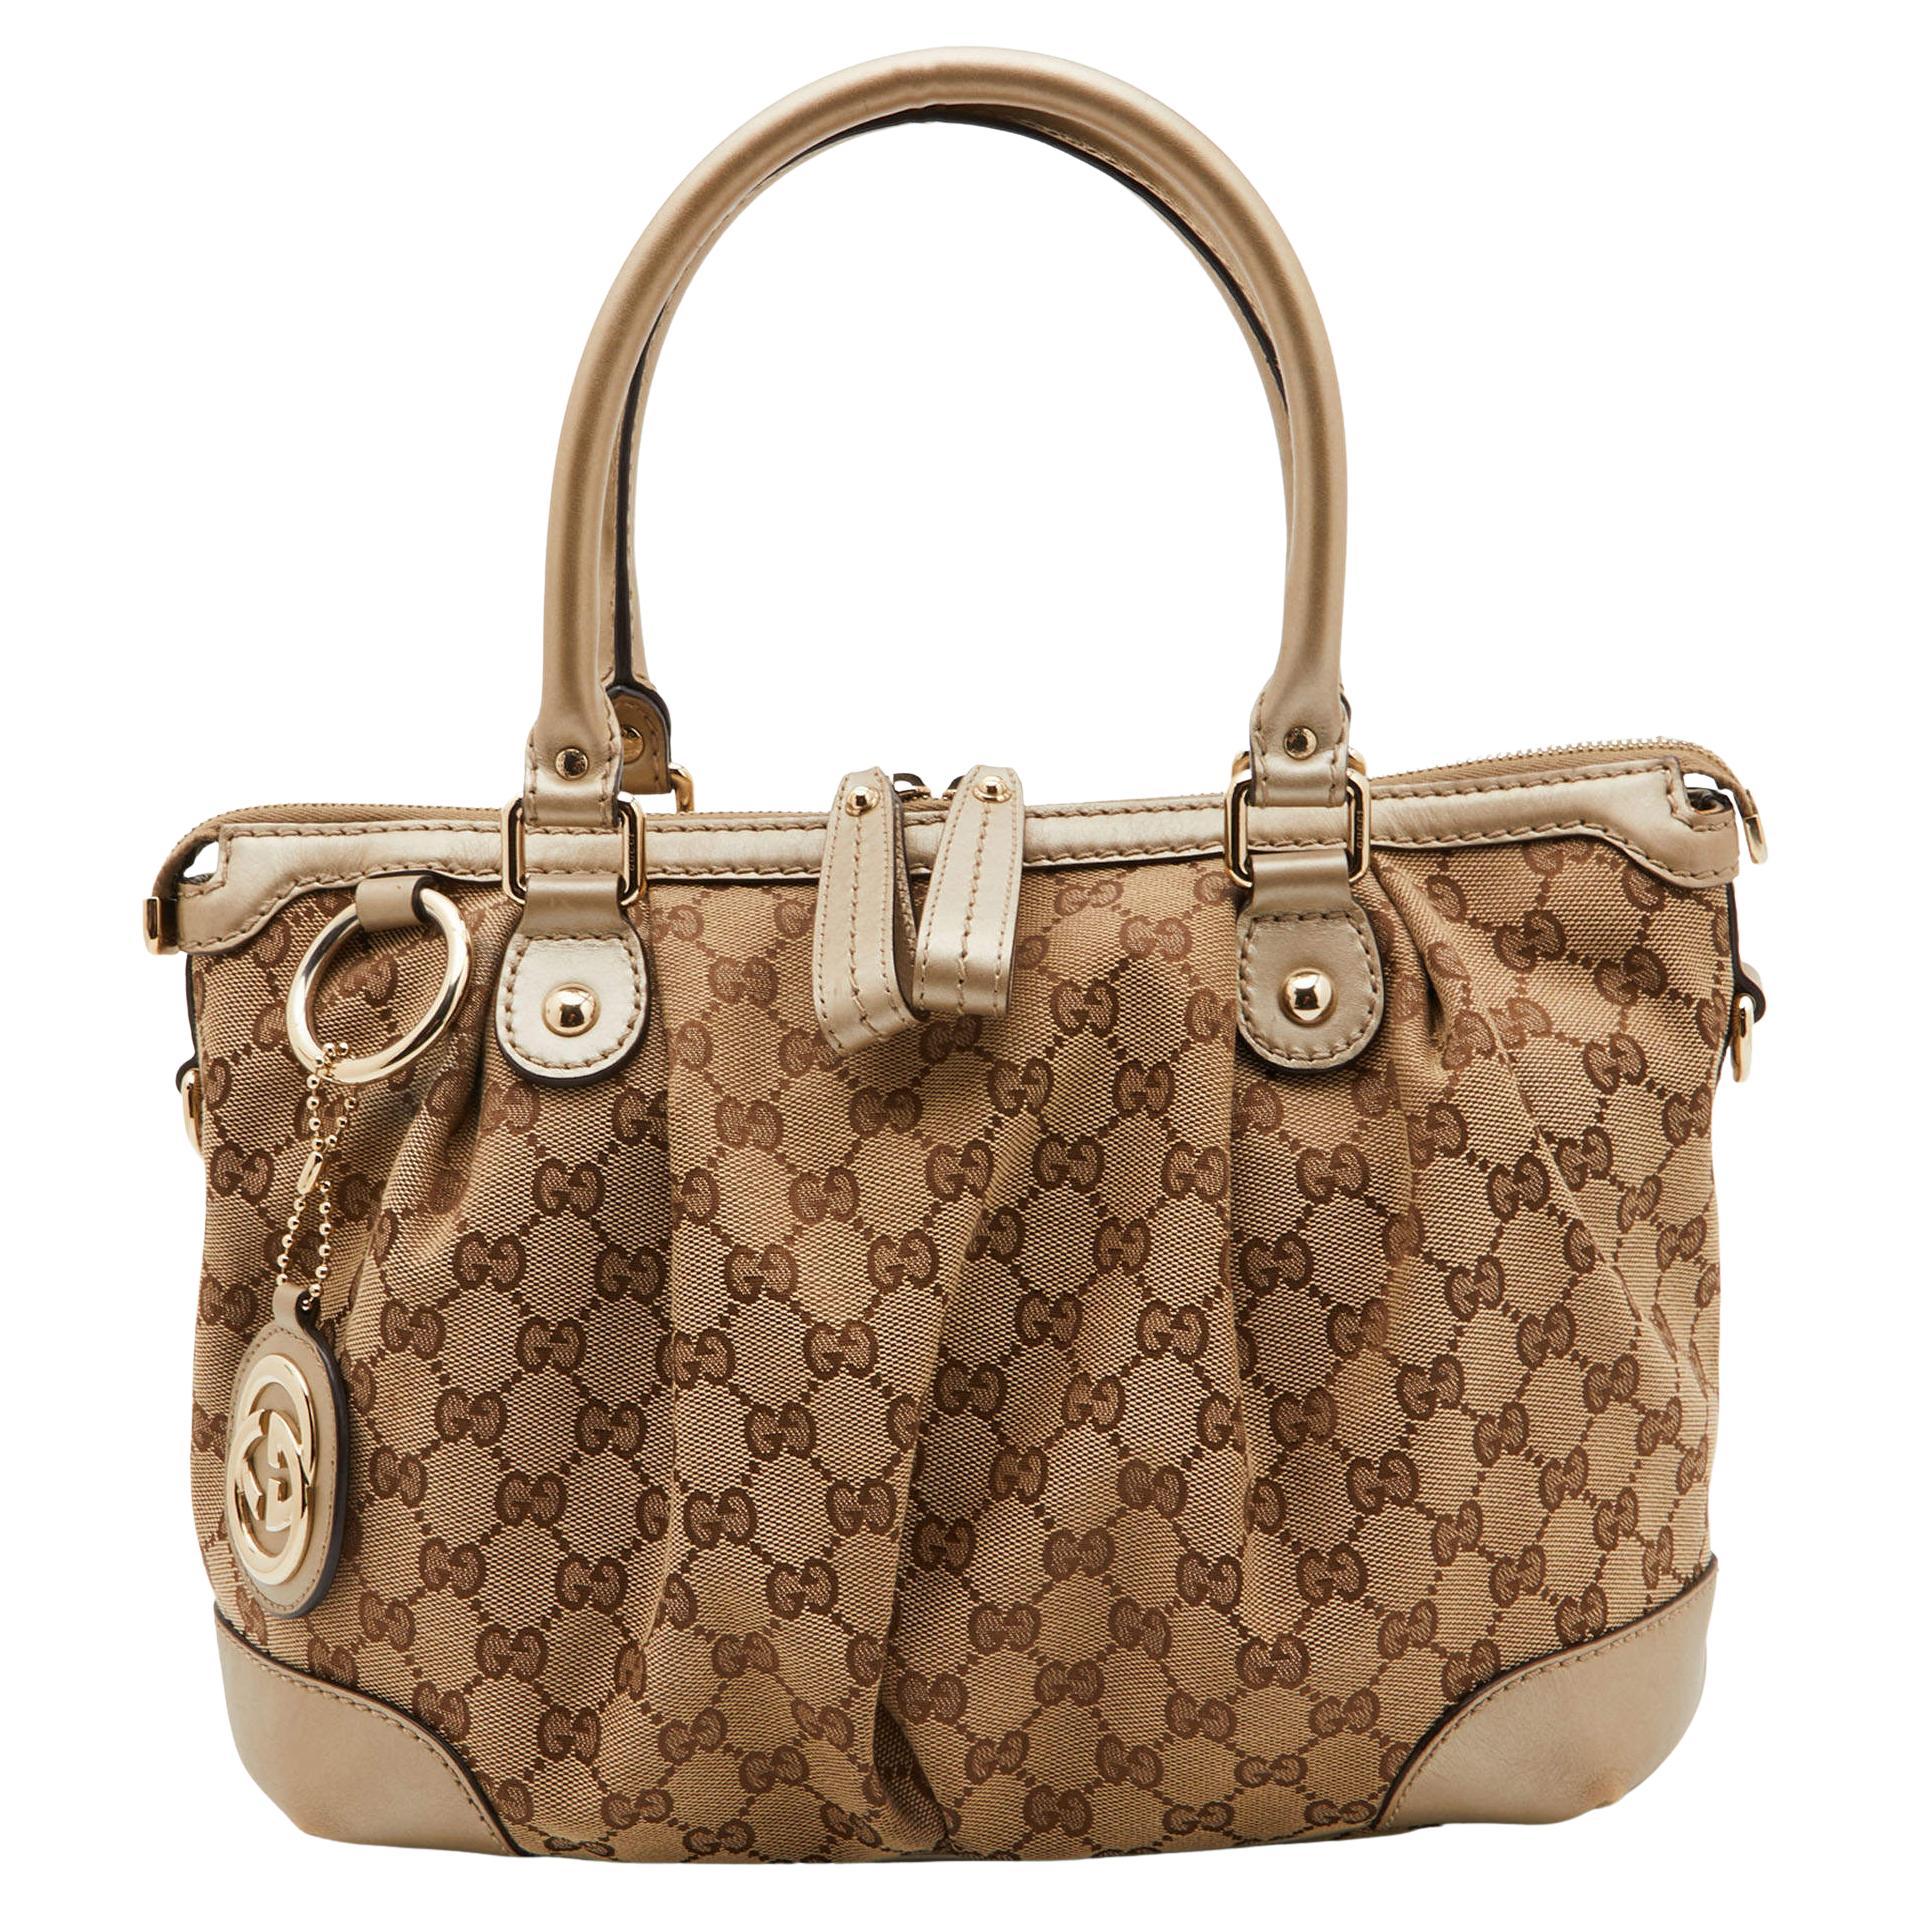 Gucci Beige GG Canvas and Leather Sukey Tote